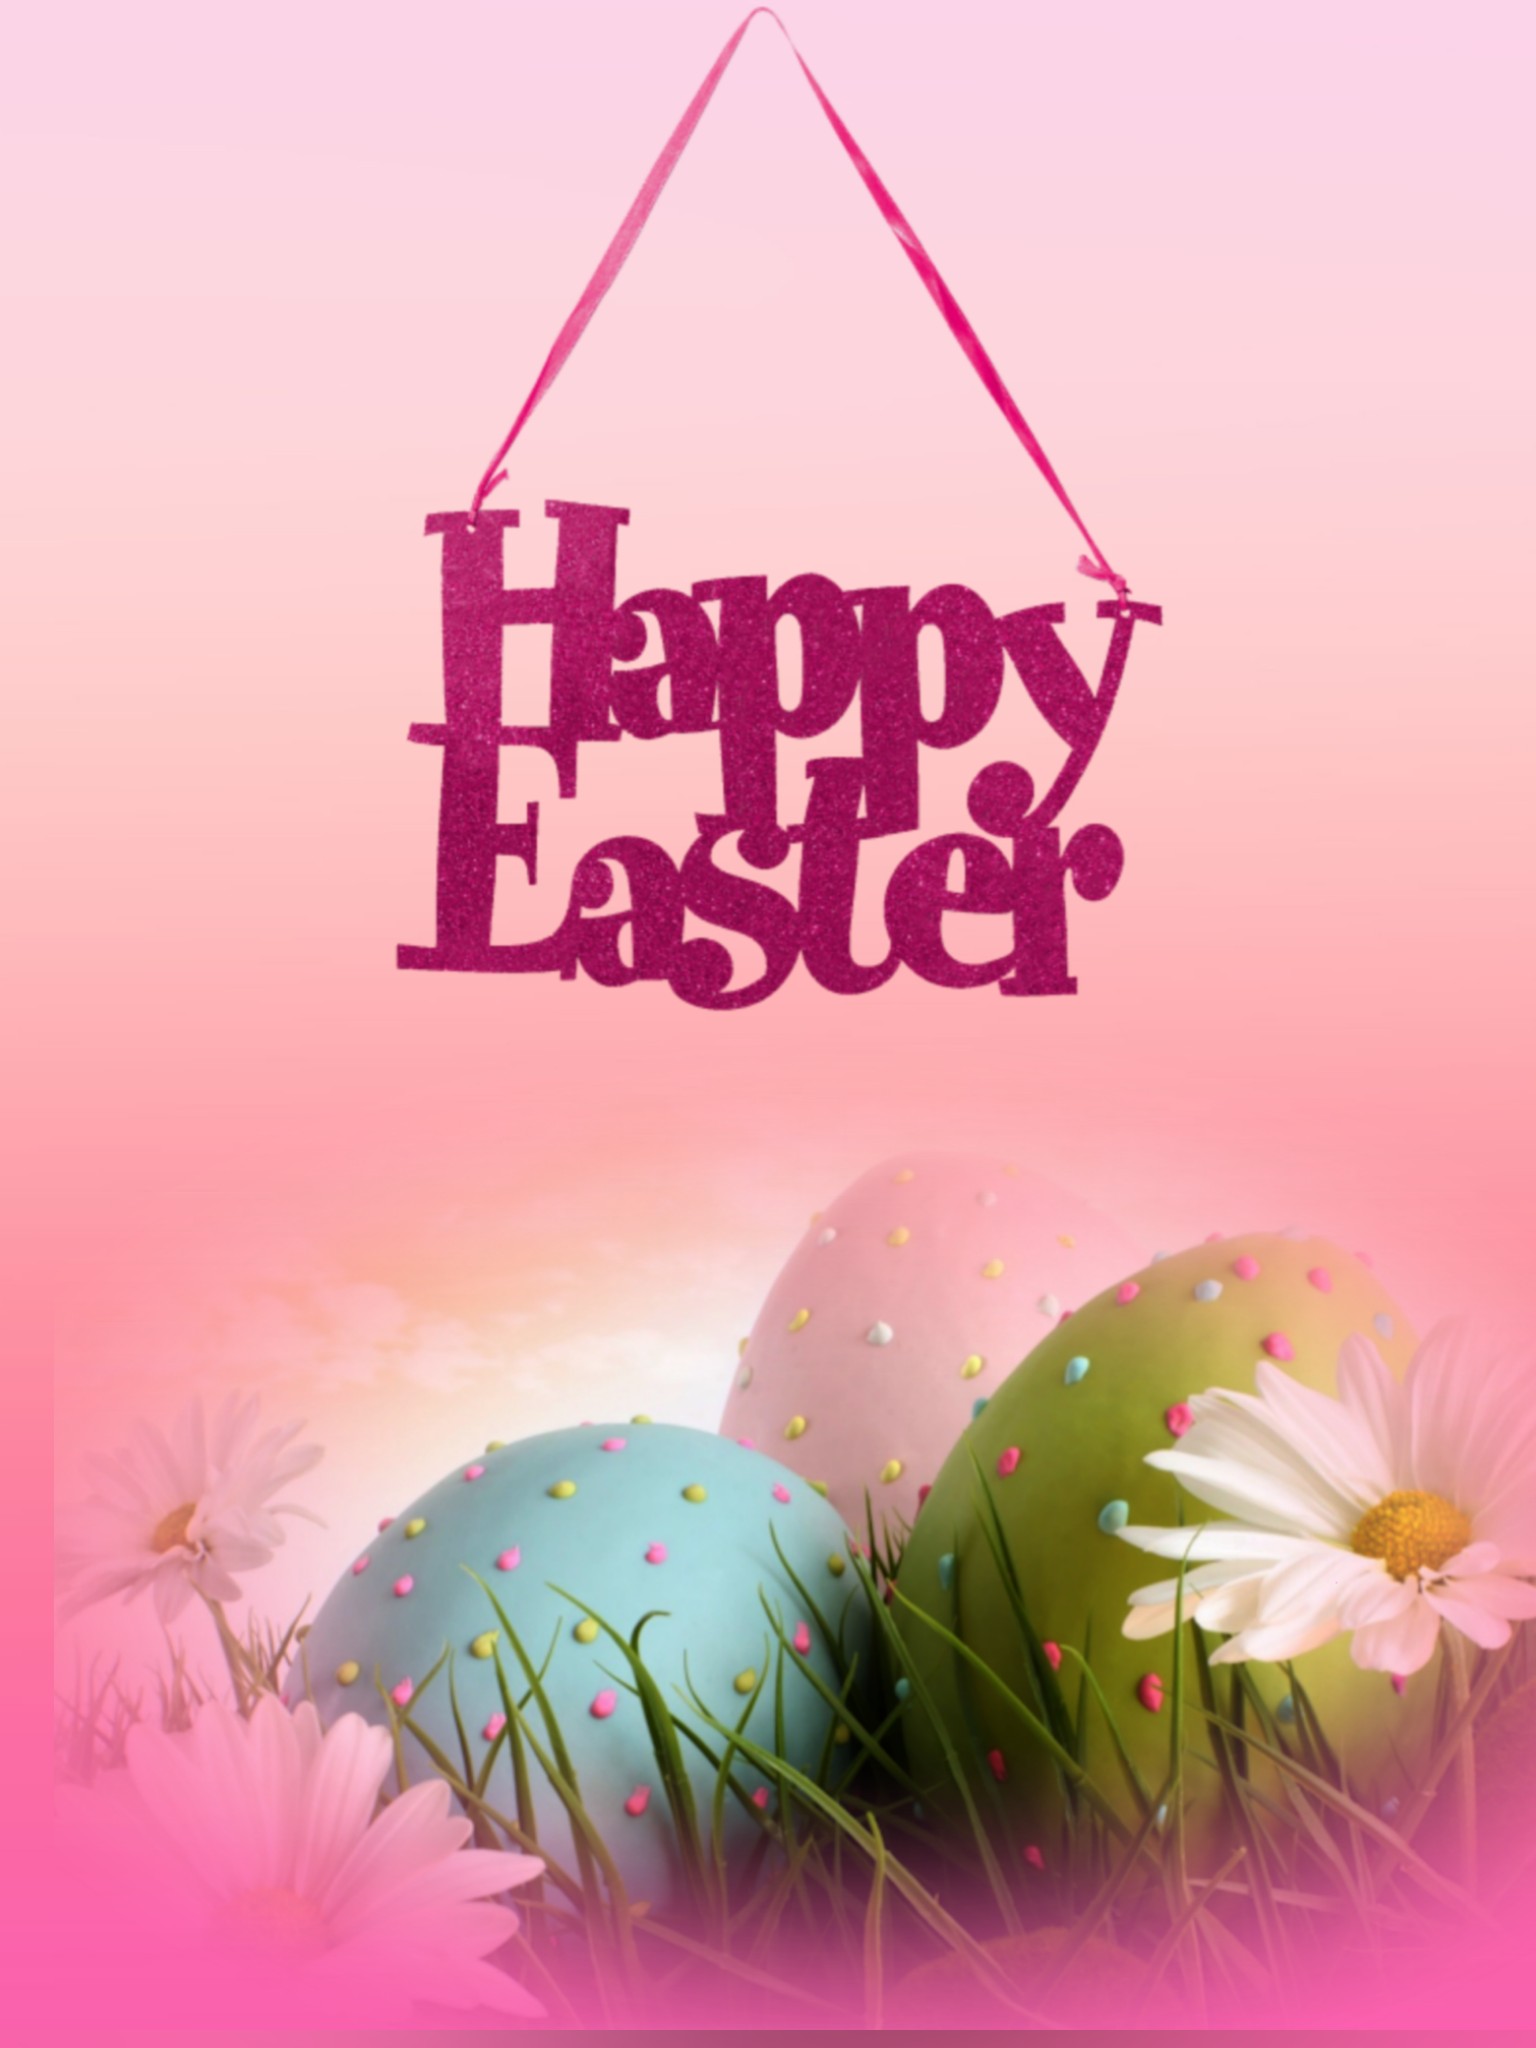  #freetoedit Happy Easter to all Picsart friends and followers. ❤❤#wallpaper #background #easterbackgrounds #happyeaster #easter #friends #keepitsimple #m